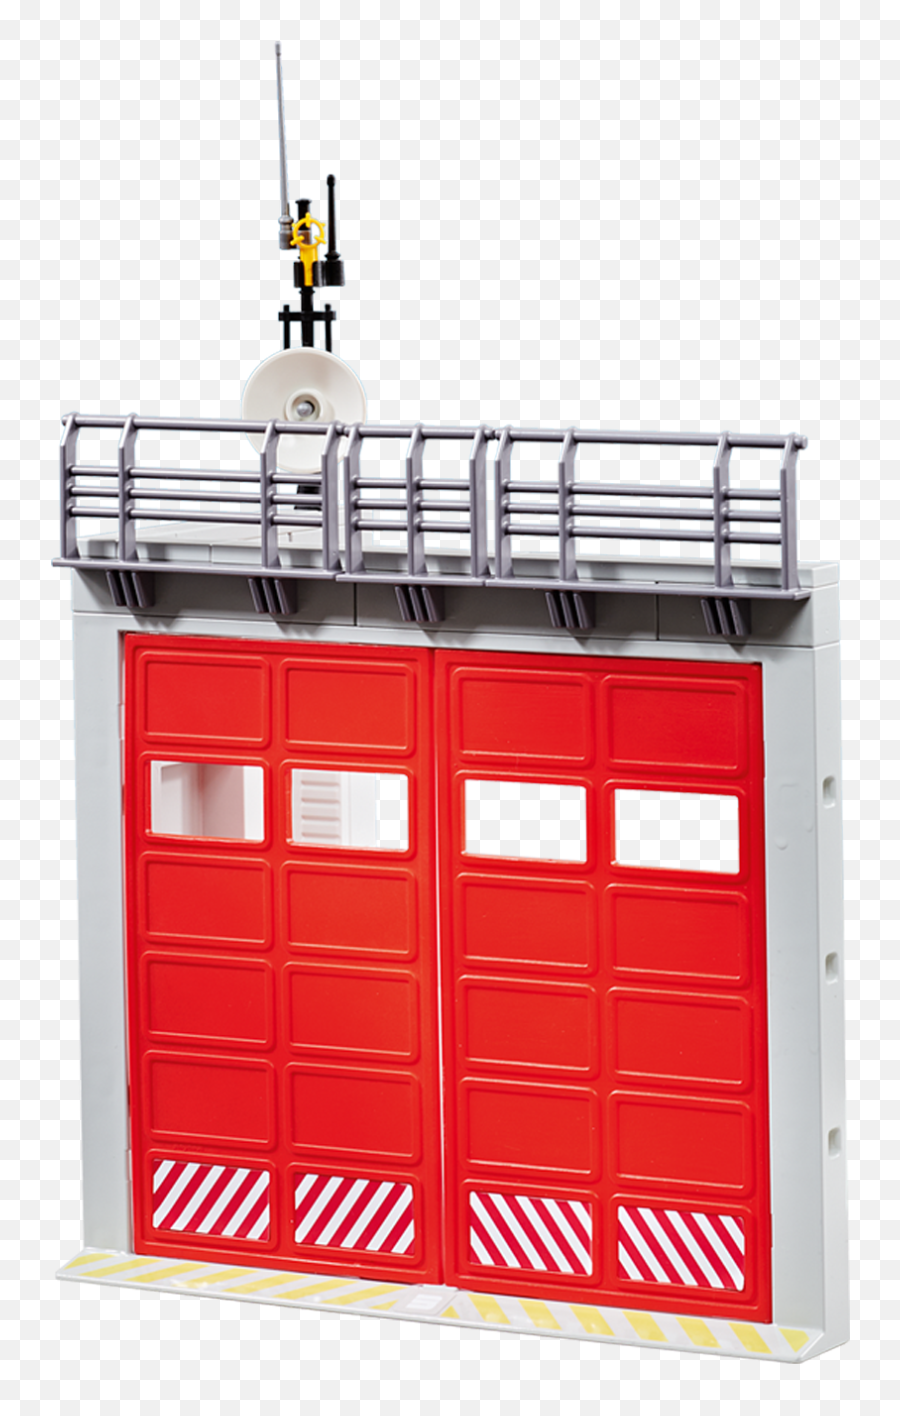 Gate Extension For Fire Station With - 9803 Playmobil Playmobil 9803 Png,Icon 80 Fireplace